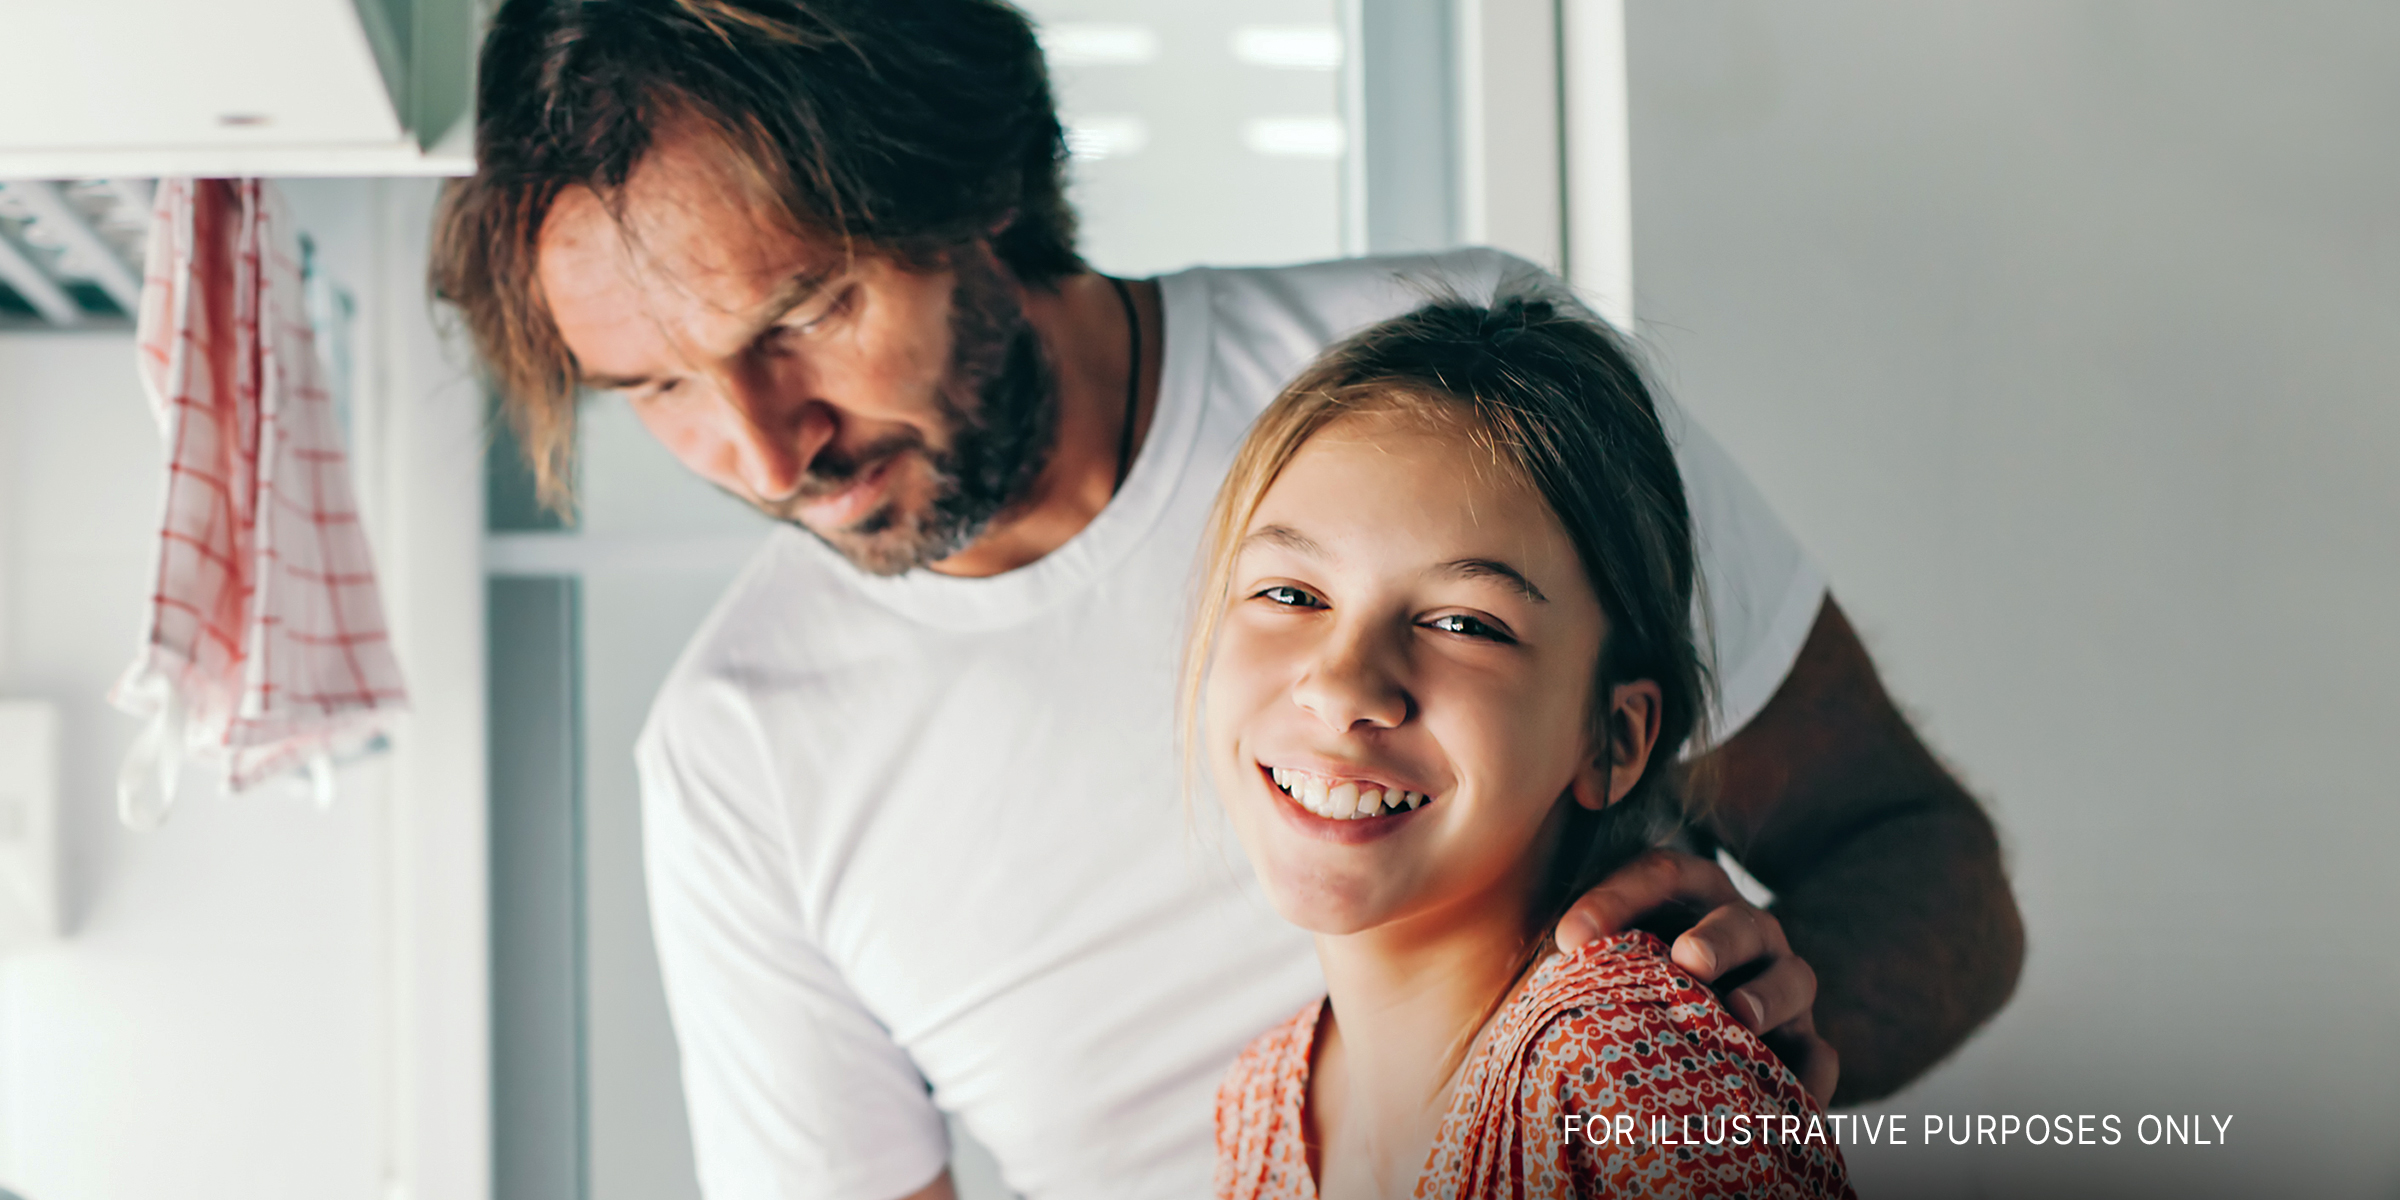 Father and his daughter | Source: Shutterstock